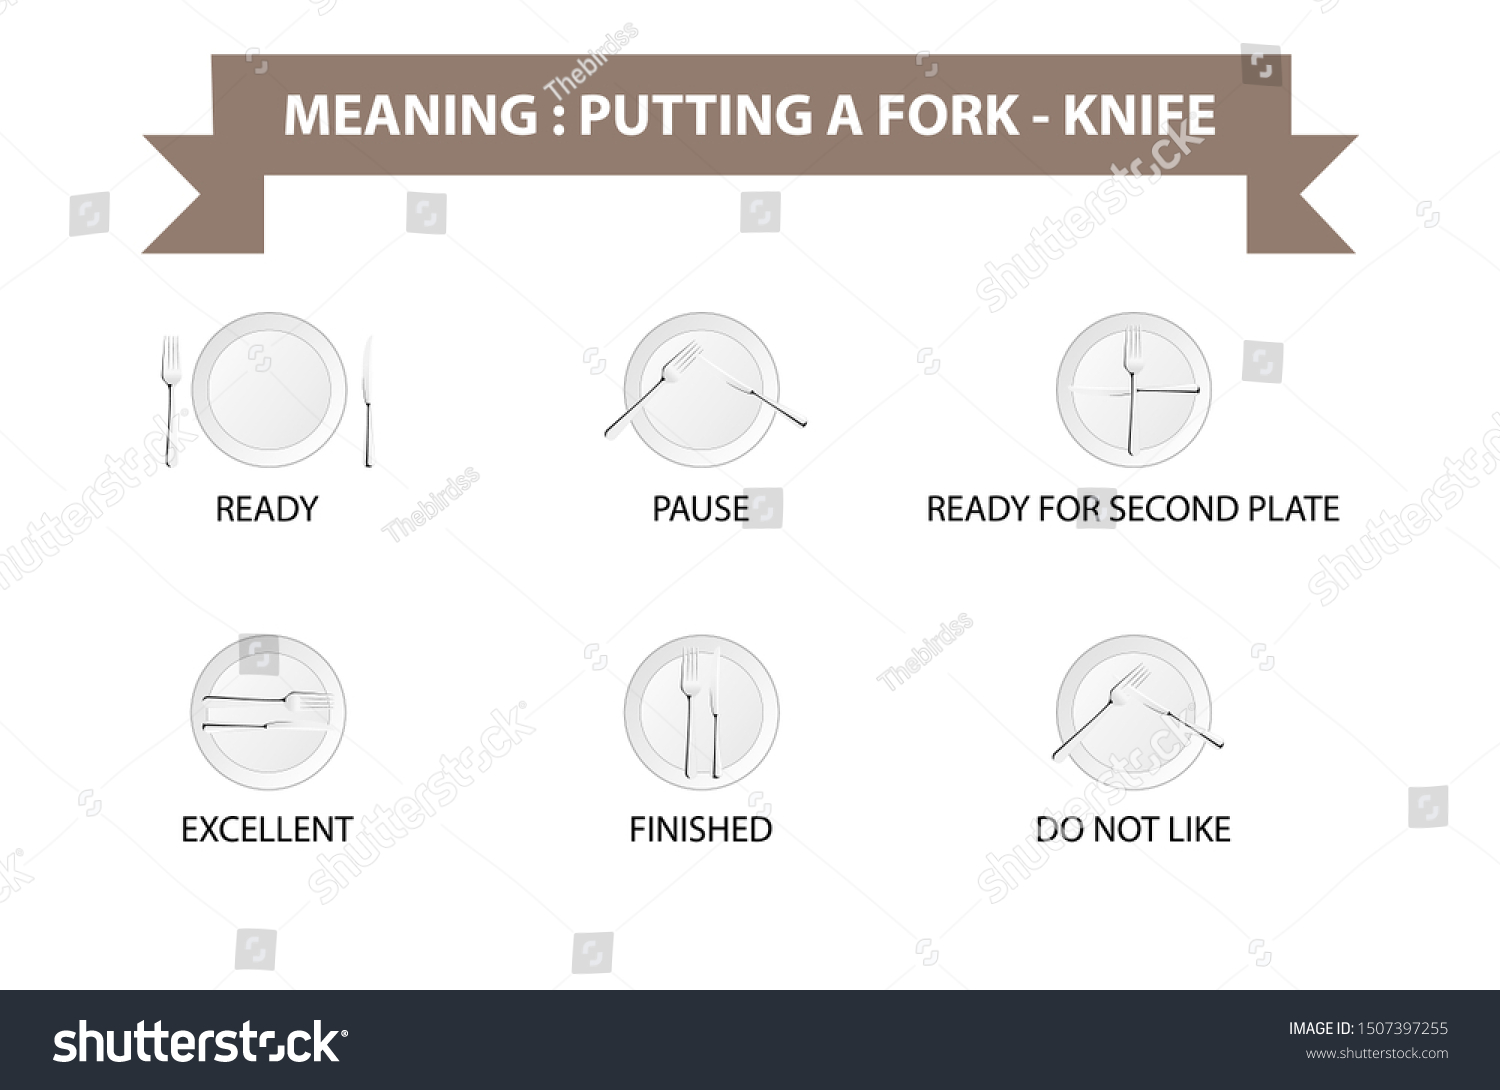 fork meaning